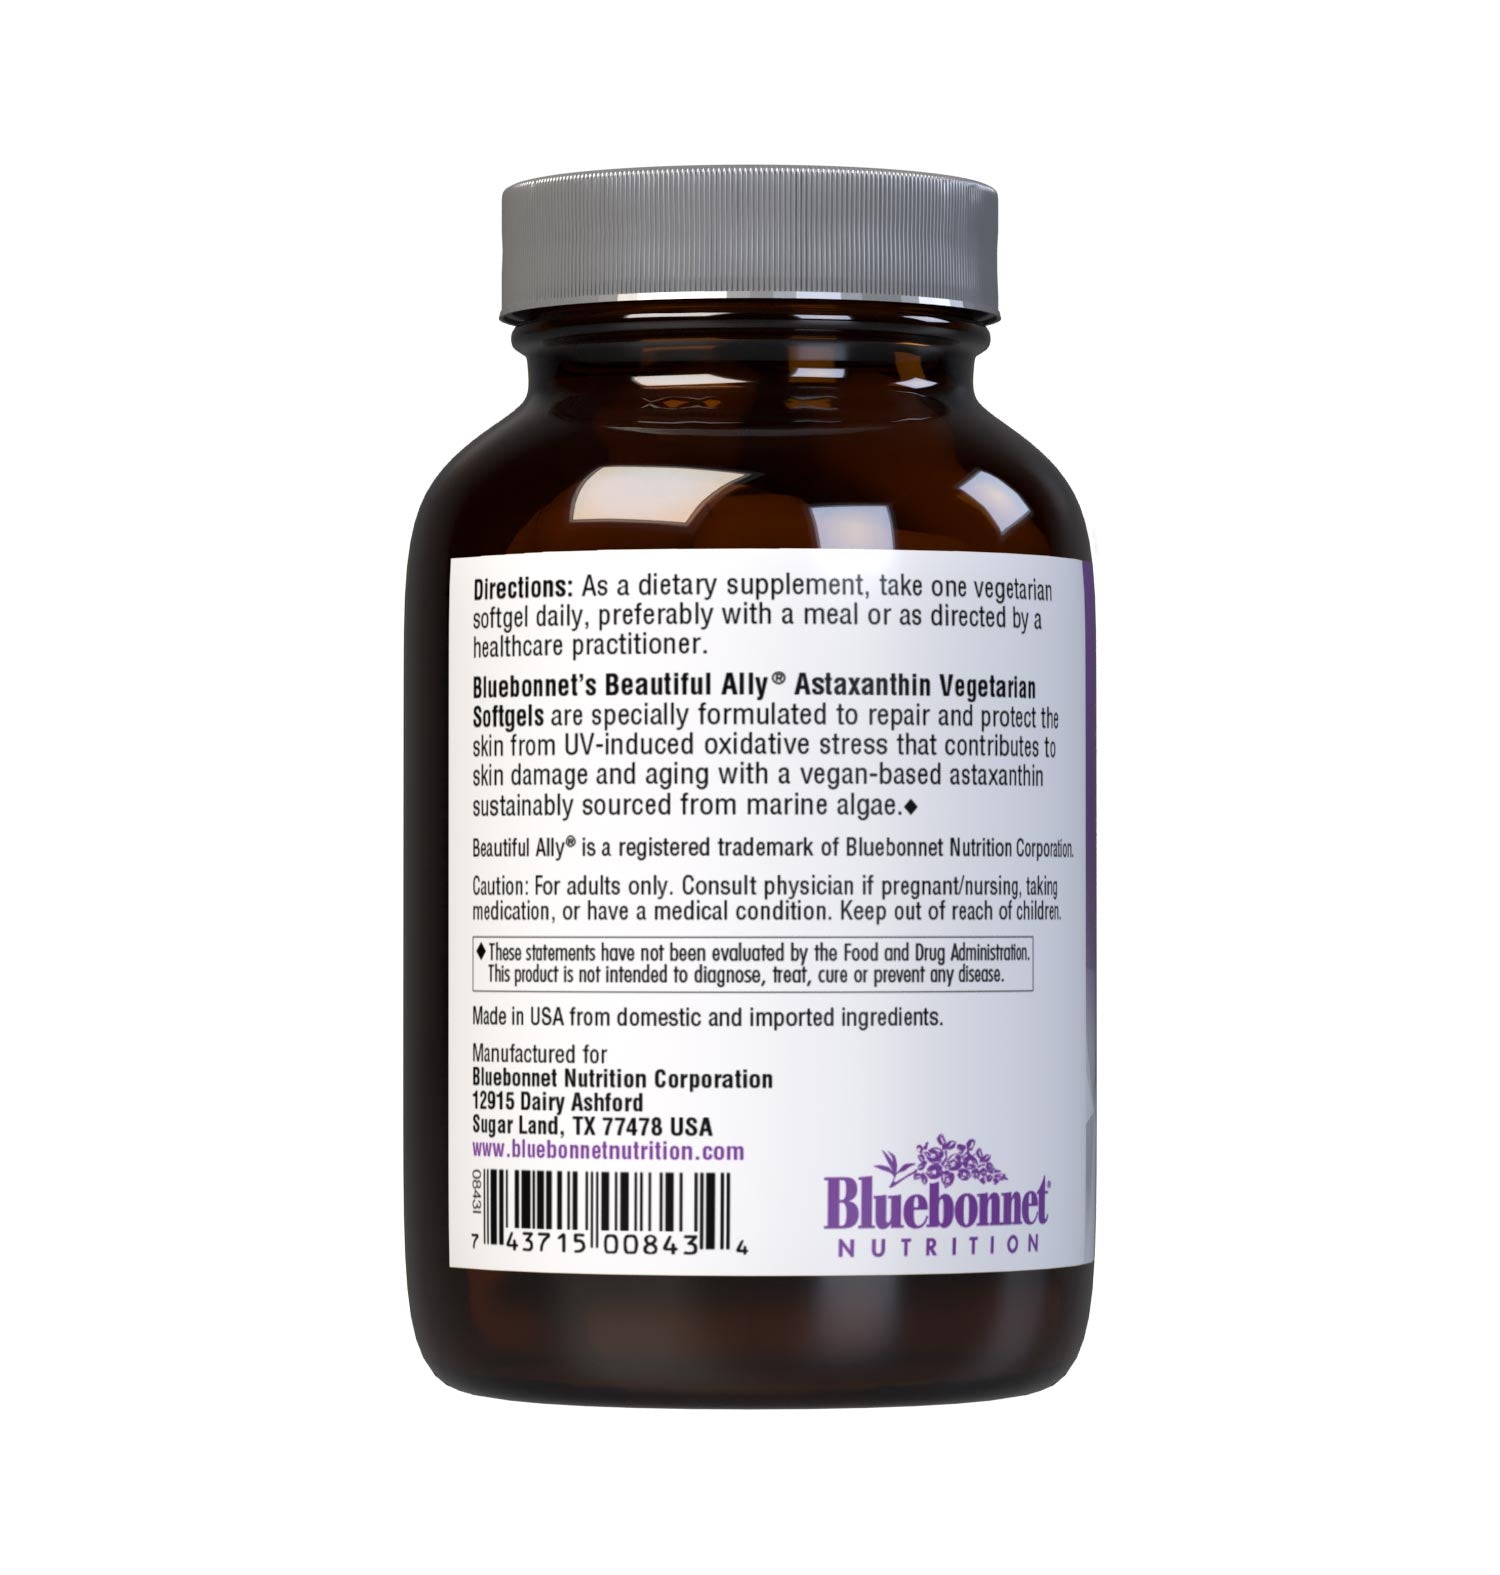 Bluebonnet’s Beautiful Ally Astaxanthin 60 Vegetarian Softgels are specially formulated to help repair and protect the skin from UV-induced oxidative stress that contributes to skin damage and aging with a vegan-based astaxanthin sustainably-sourced from marine algae. Description panel. #size_60 count